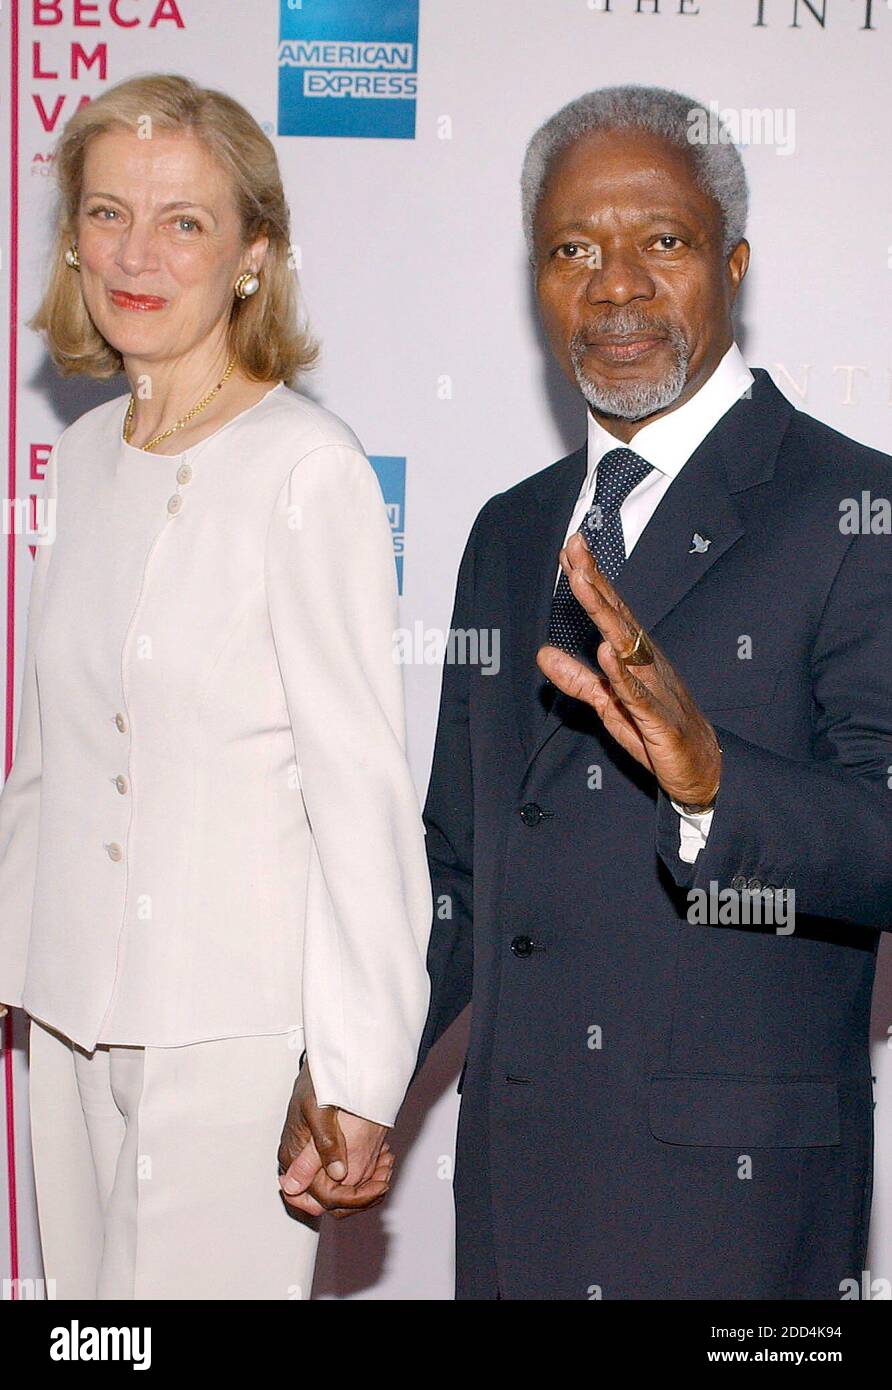 File Photo - "United Nations Secretary General Kofi Annan and his wife Nane arrive at the premiere of ""The Interpreter"" held at the Ziegfled theatre for the opening night of the 2005 Tribeca Film Festival, on Tuesday April 19, 2005. Kofi Annan, the former UN secretary-general who won the Nobel Peace Prize for humanitarian work, has died aged 80, his aides say. Photo by Nicolas Khayat/ABACA." Stock Photo